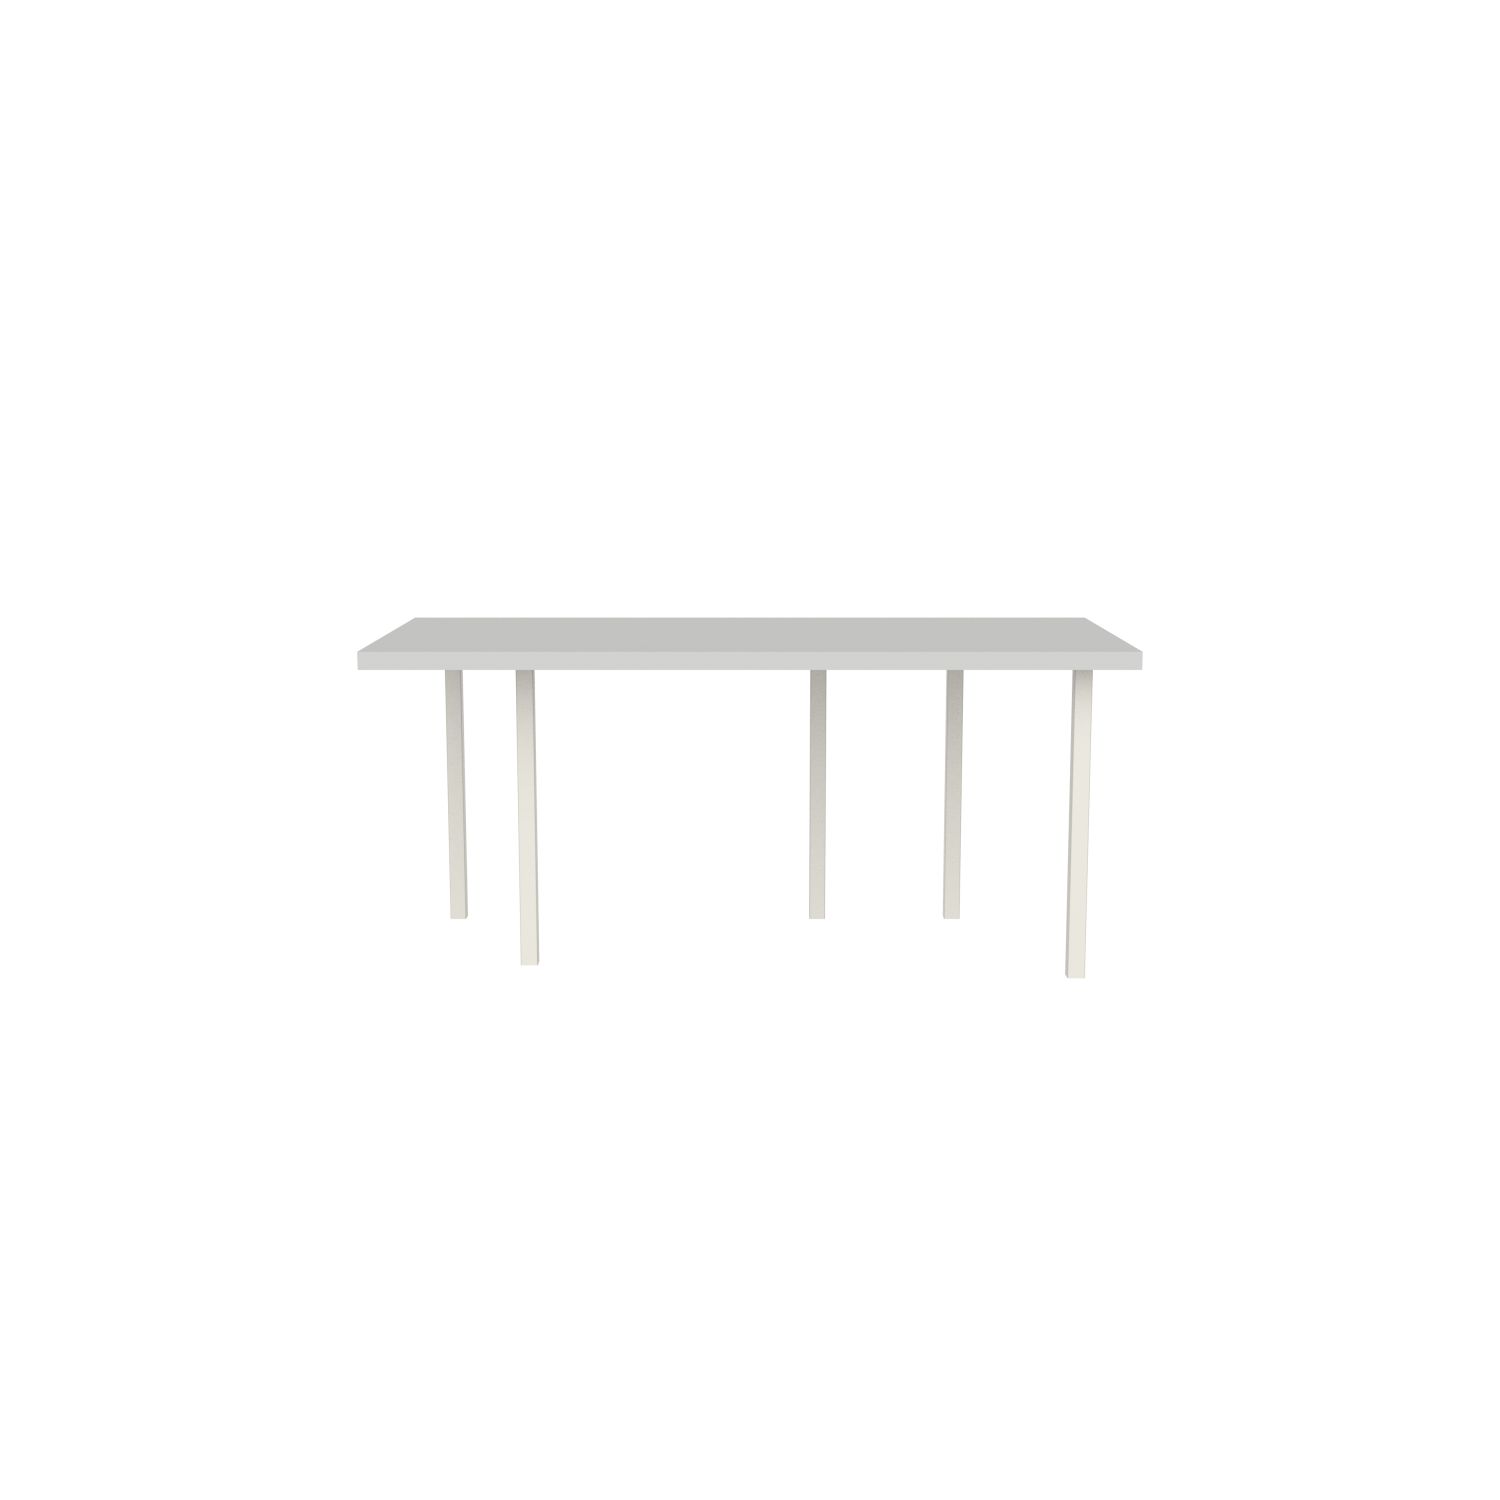 lensvelt bbrand table five fixed heigt 80x172 hpl white 50 mm price level 1 white ral9010